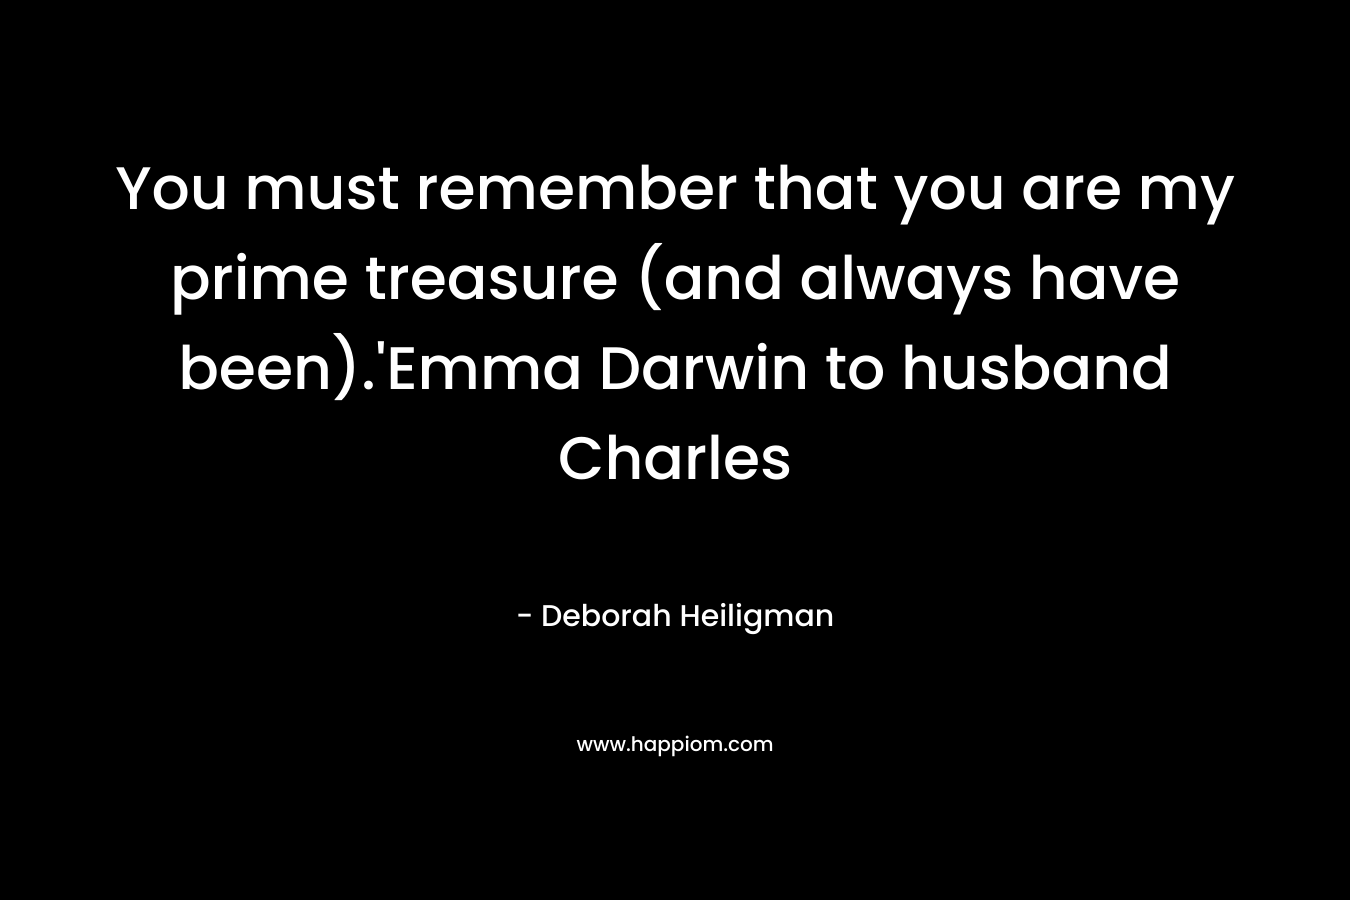 You must remember that you are my prime treasure (and always have been).'Emma Darwin to husband Charles